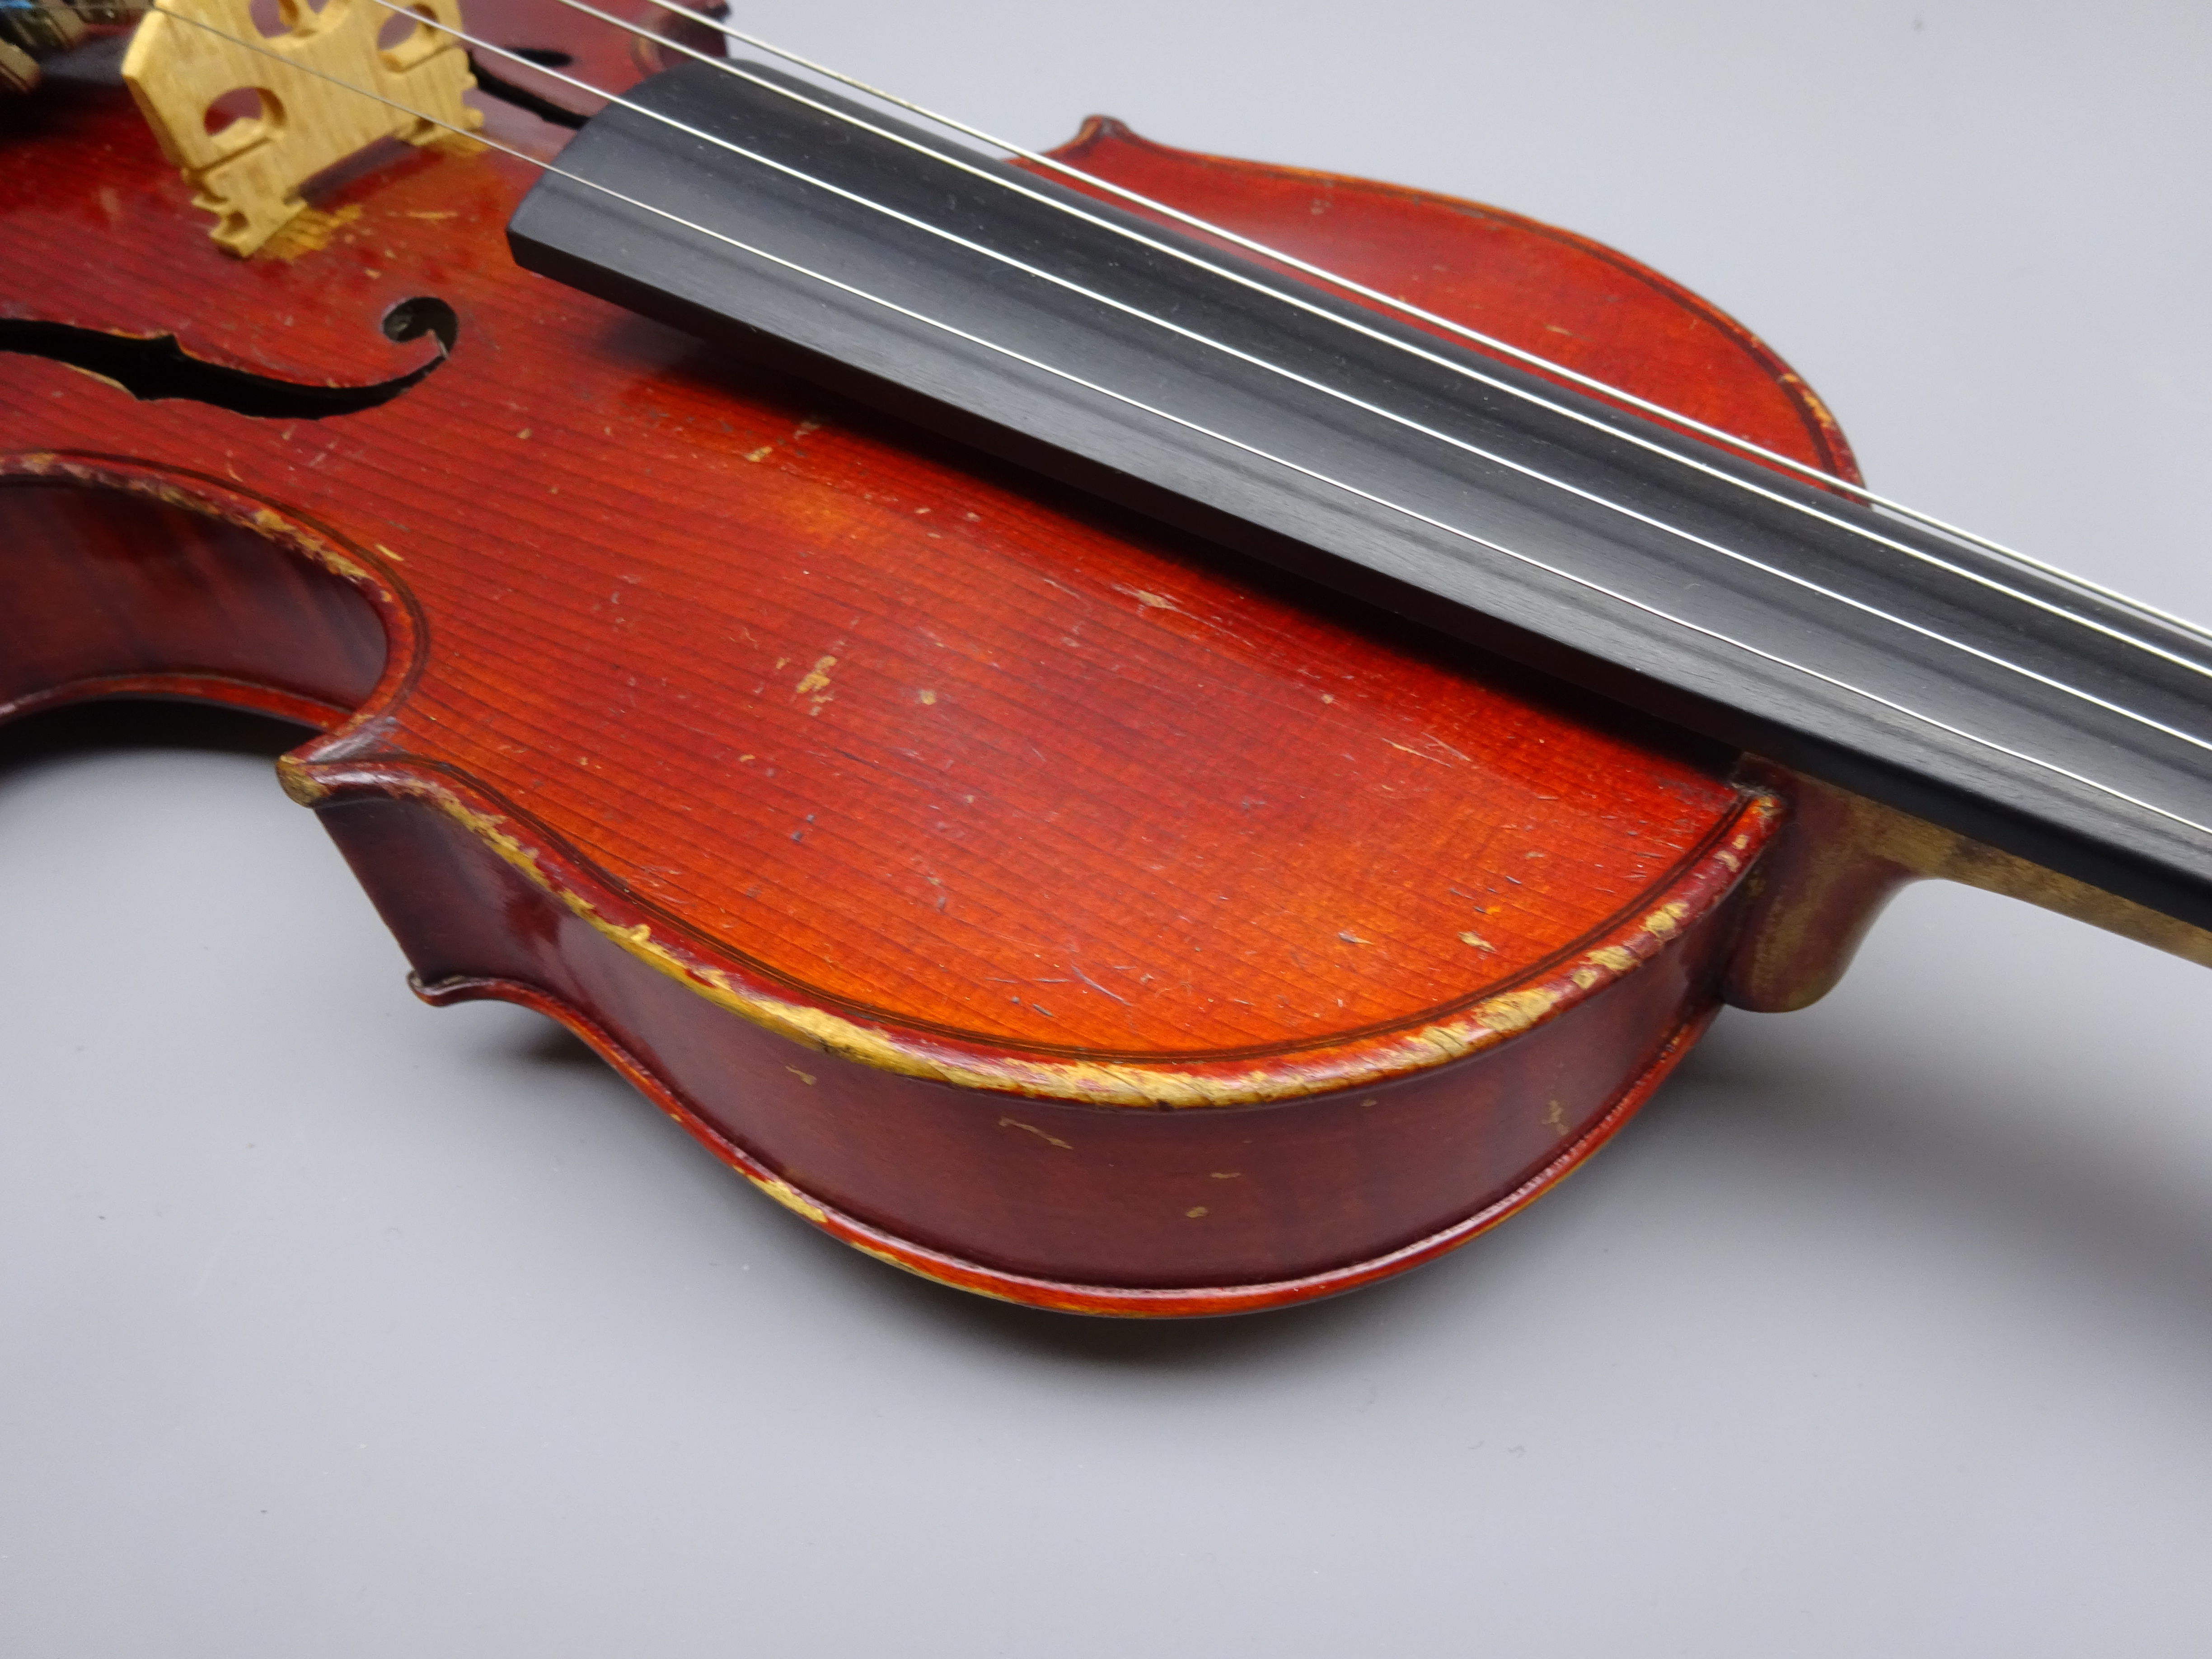 Early 20th century violin, French or German, with 36cm one-piece maple back and ribs and spruce top, - Image 6 of 9